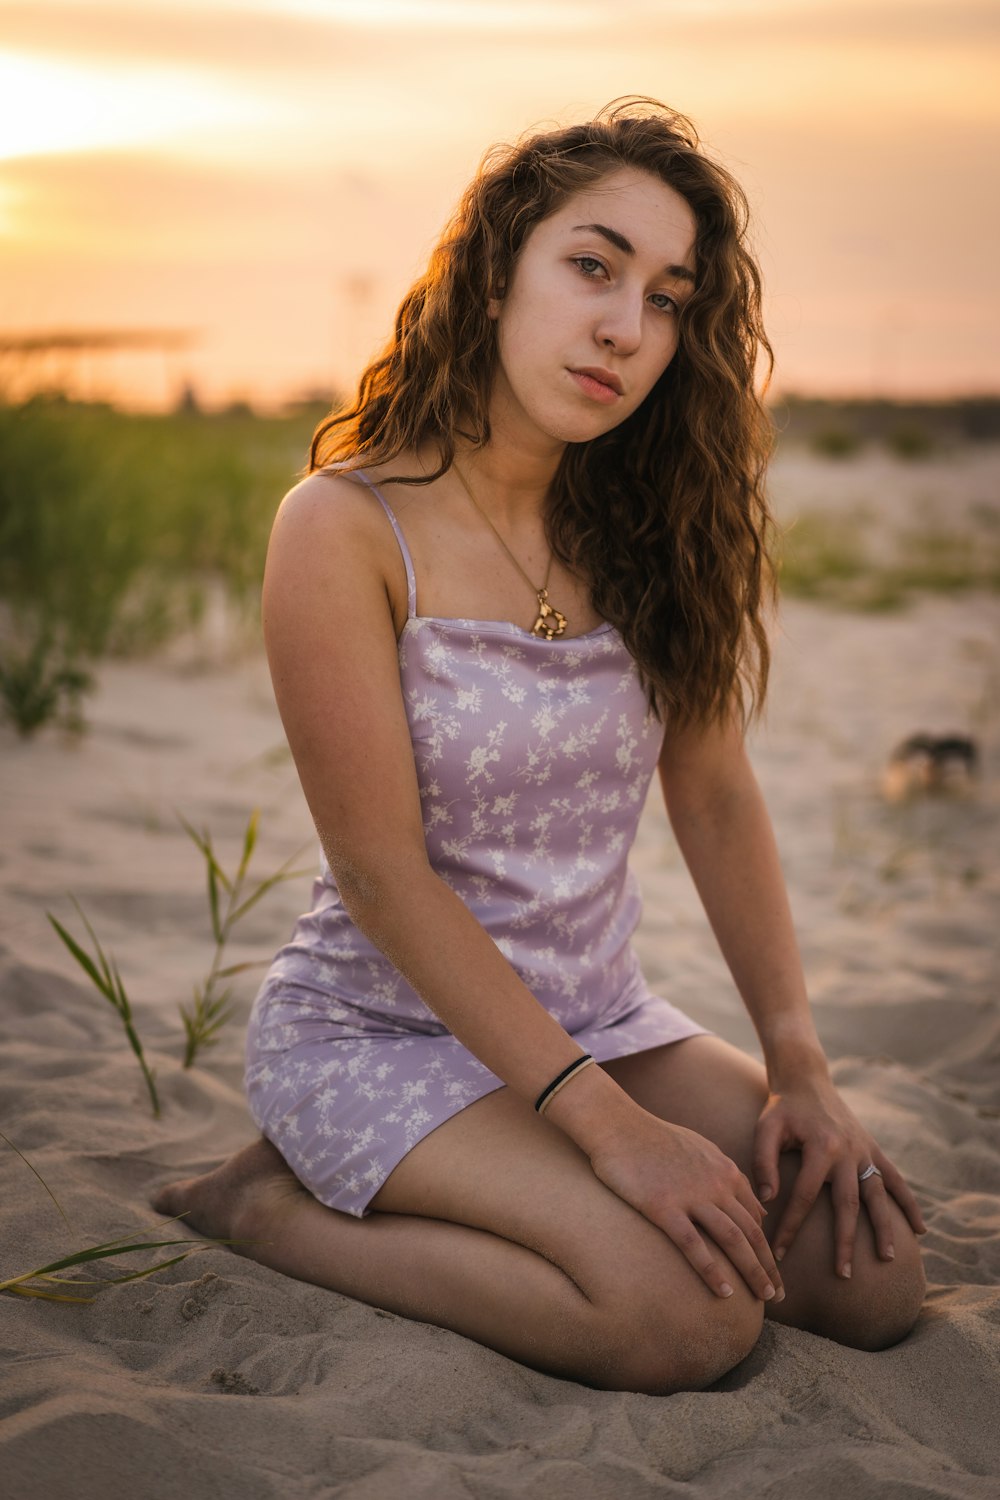 woman in white spaghetti strap dress sitting on sand during sunset